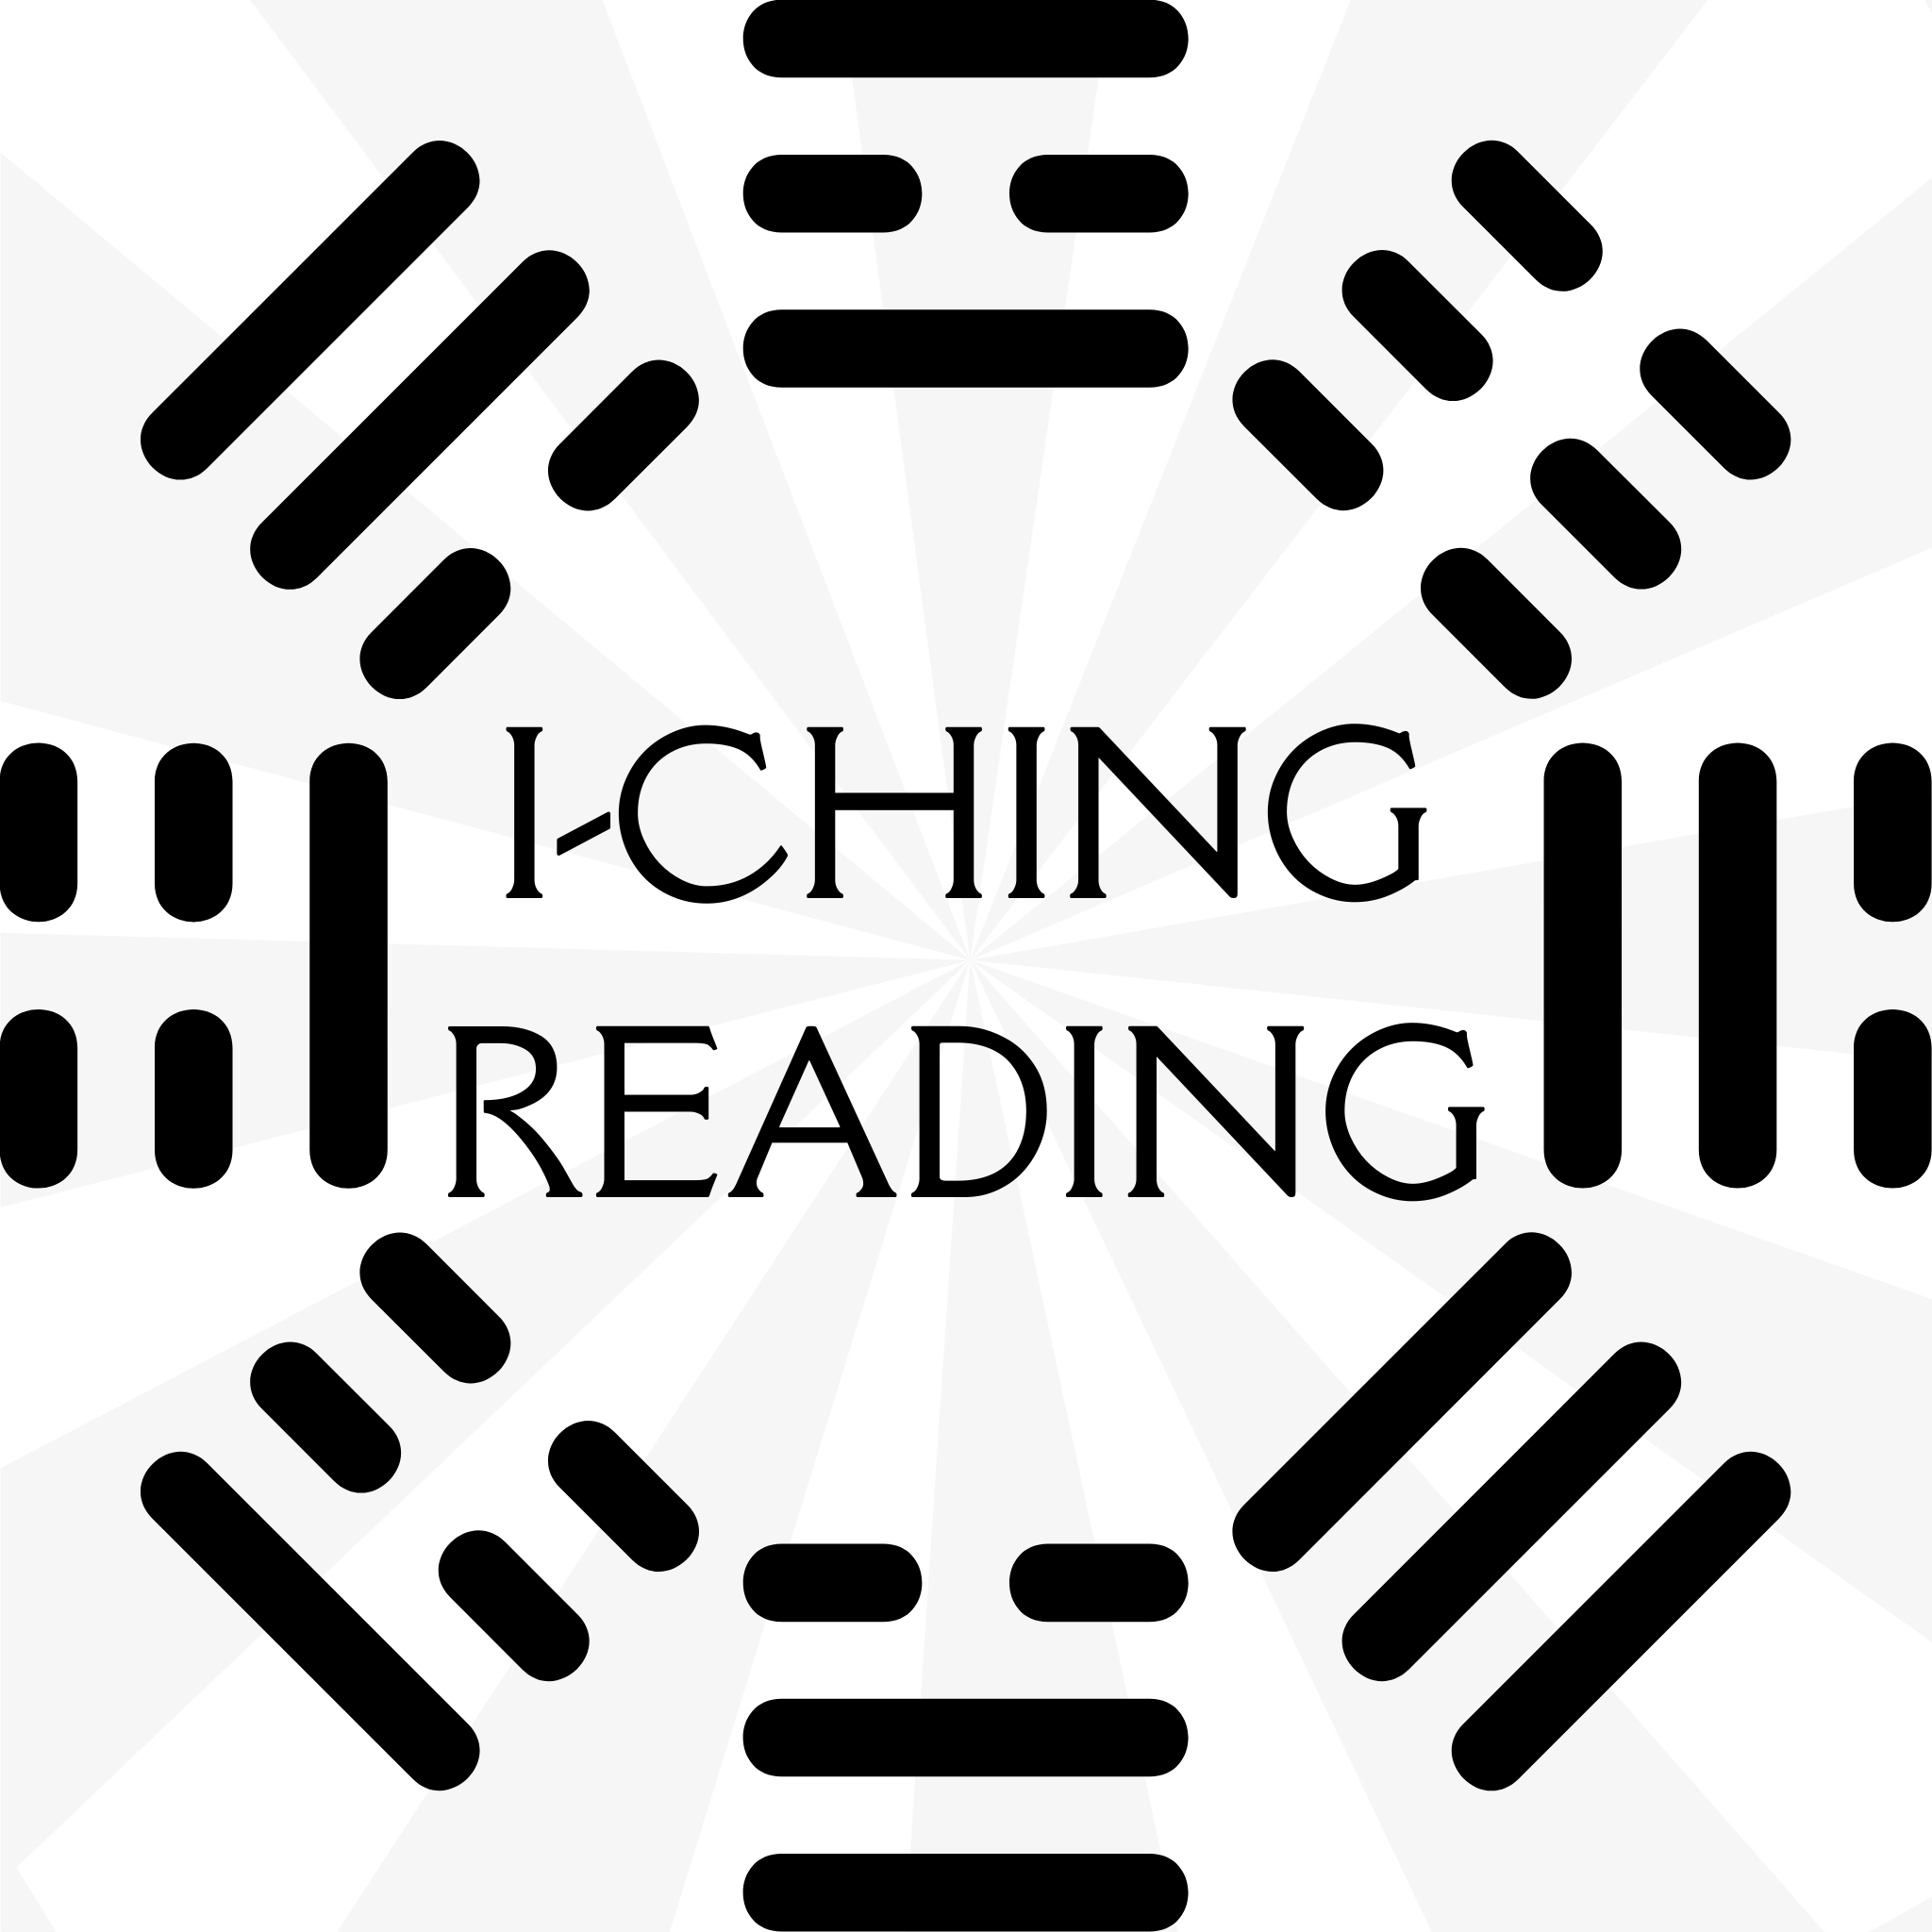 I Ching Reading